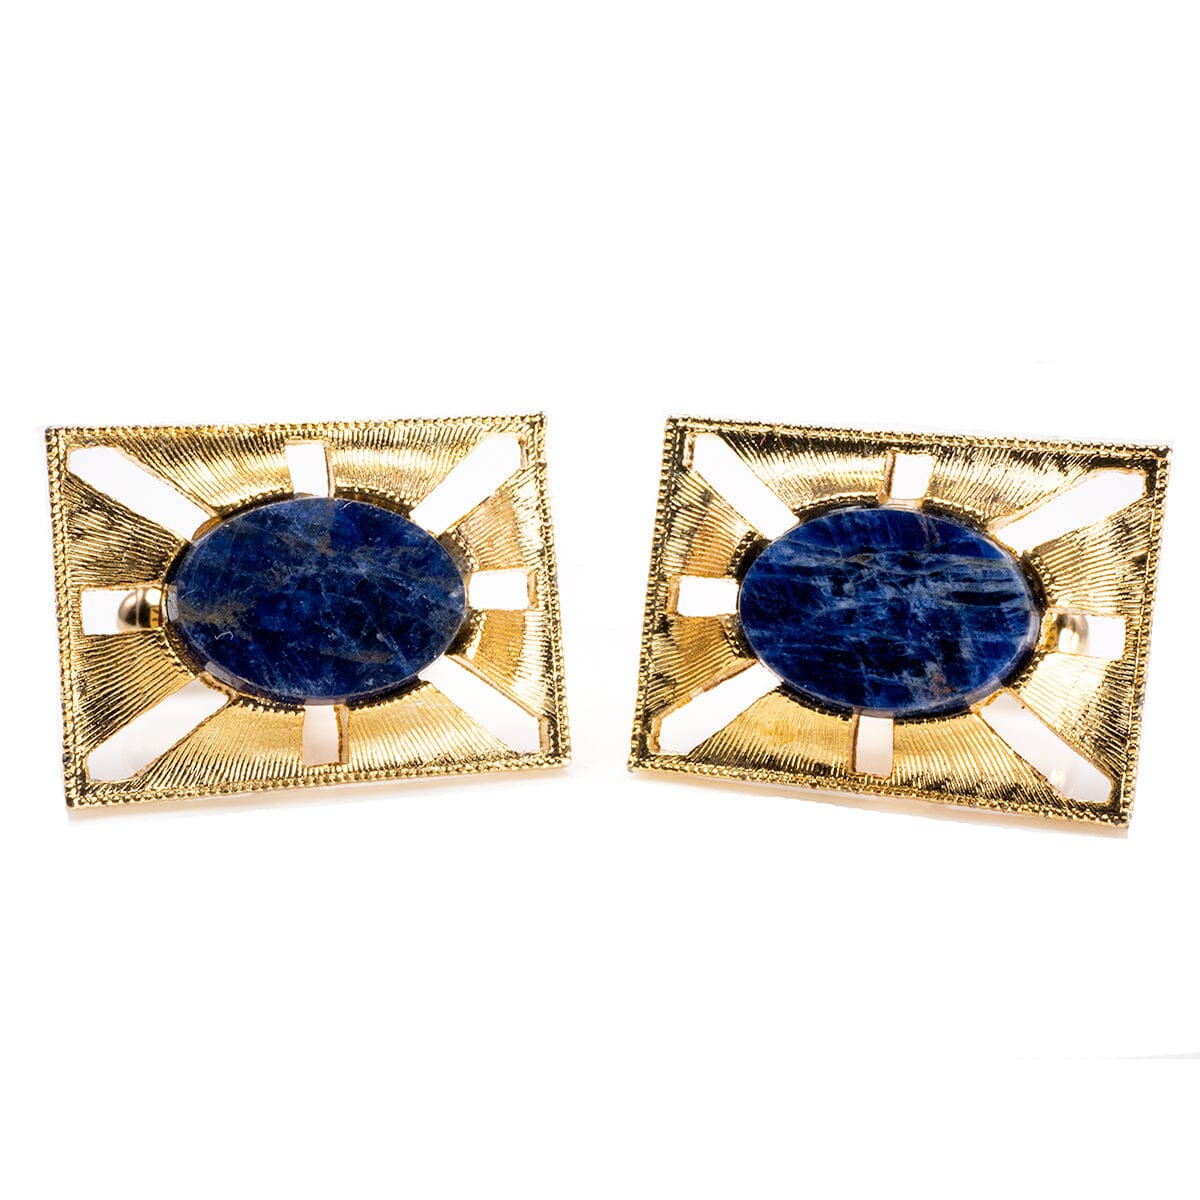 Great Lakes Boutique Traditions Limited Edition Vintage Sodalite Cuff Link Set with Coordinating Pin